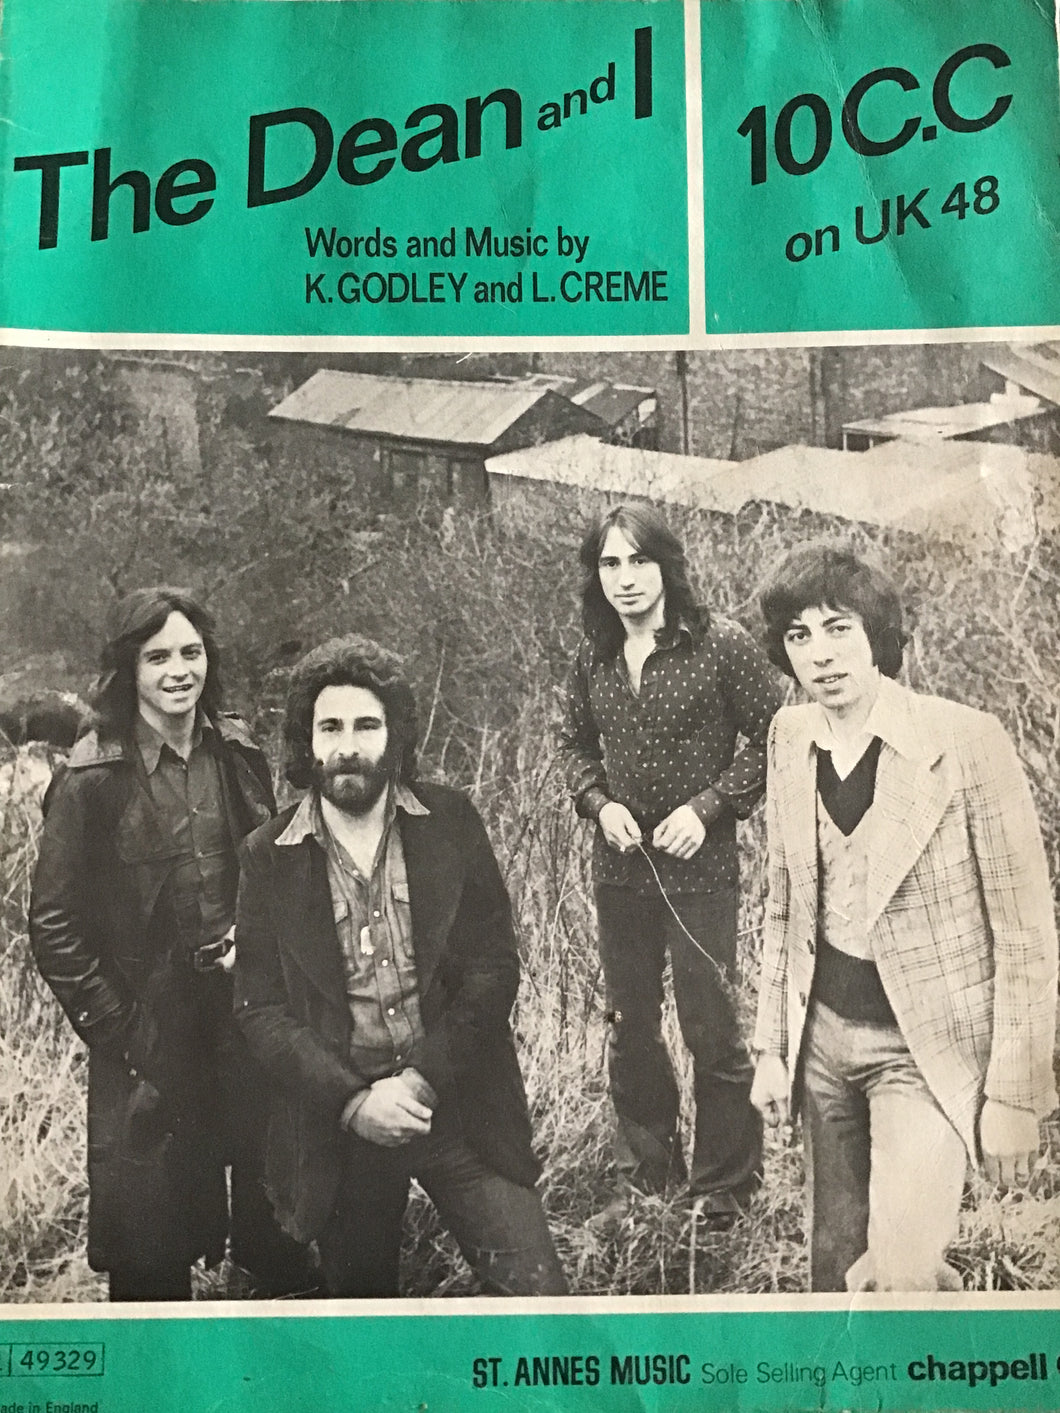 10cc The Dean and I - Music and words sheet music.